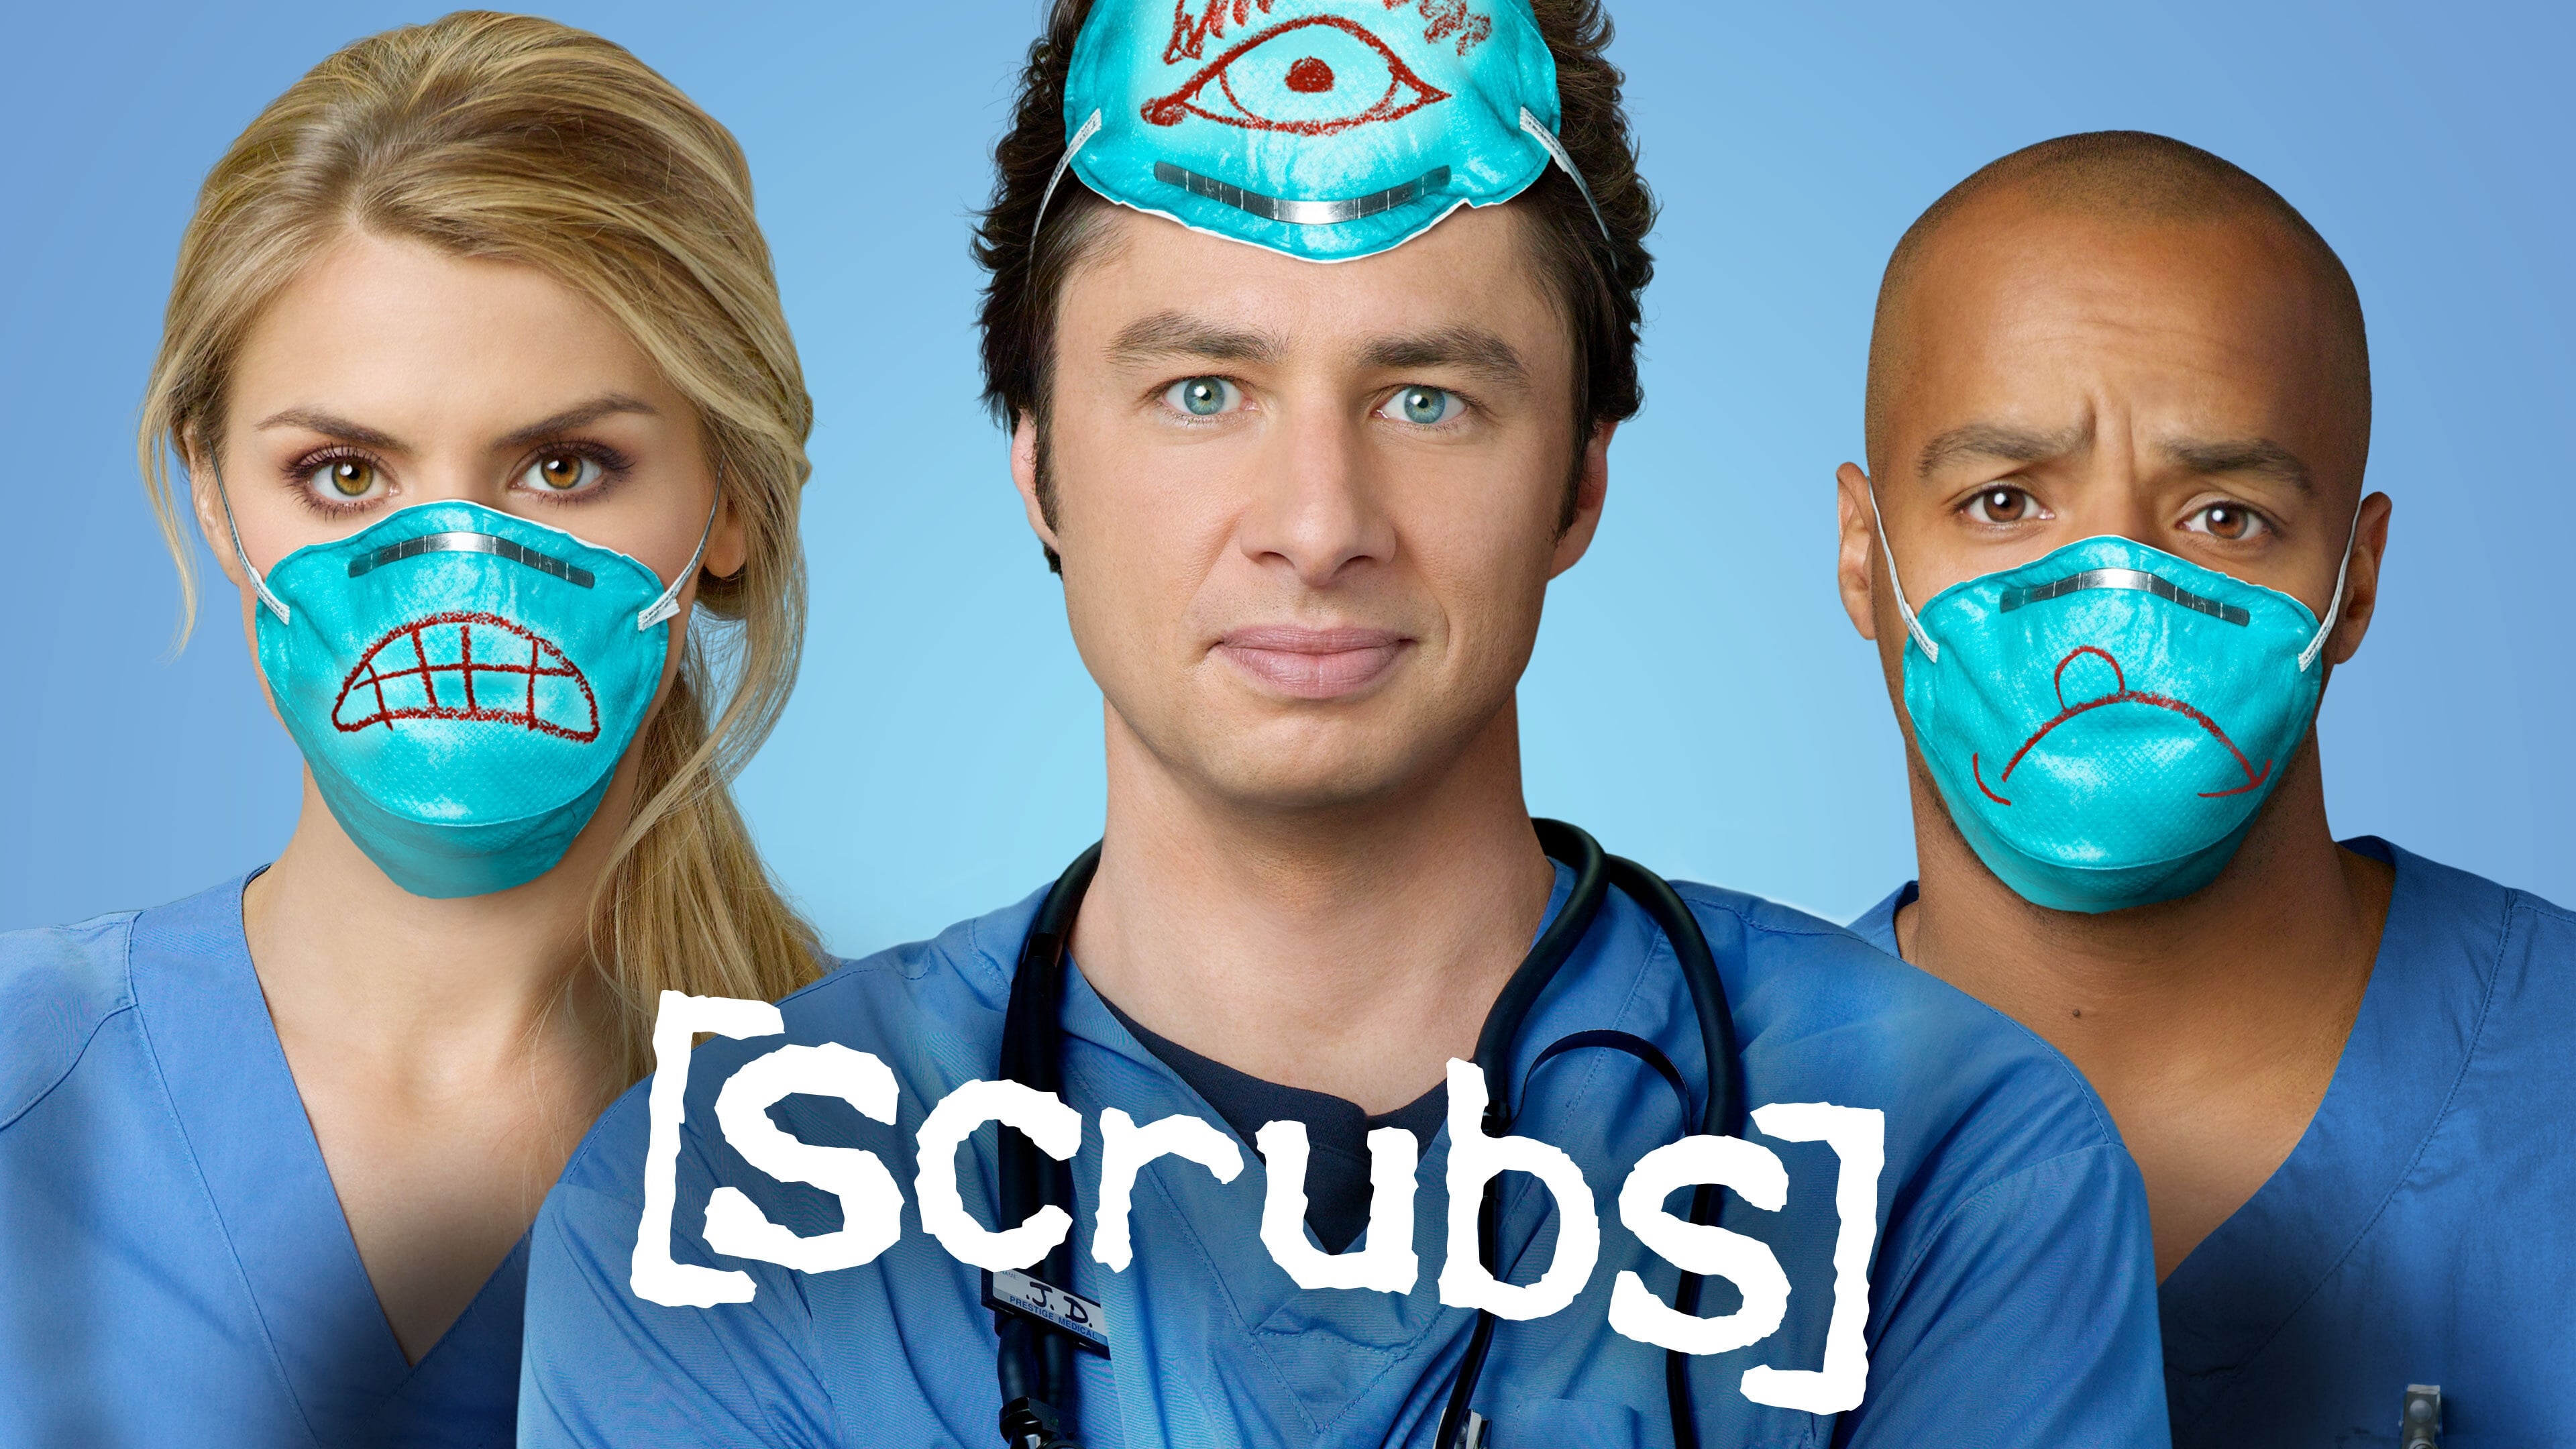 How to Find the Best Urbane Scrubs On Amazon. : The 10 Best Tips for Buying Quality Scrubs Online